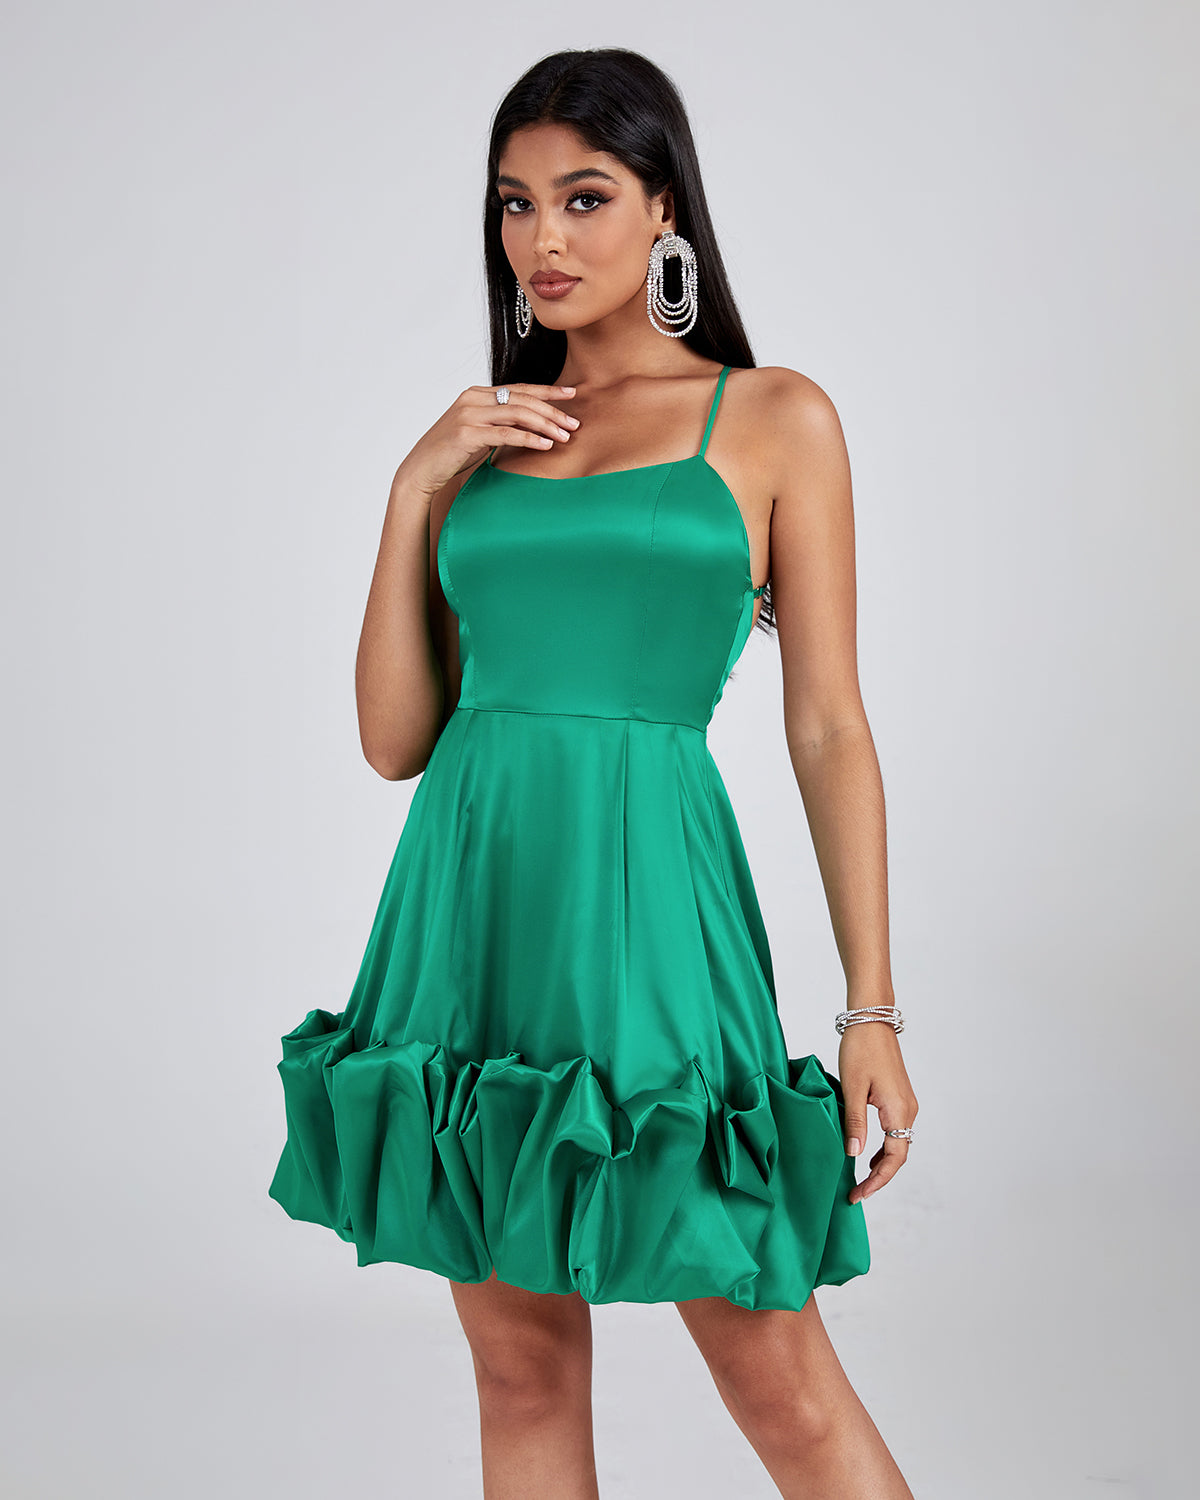 Backless Strappy Bustier Ruffle Dress